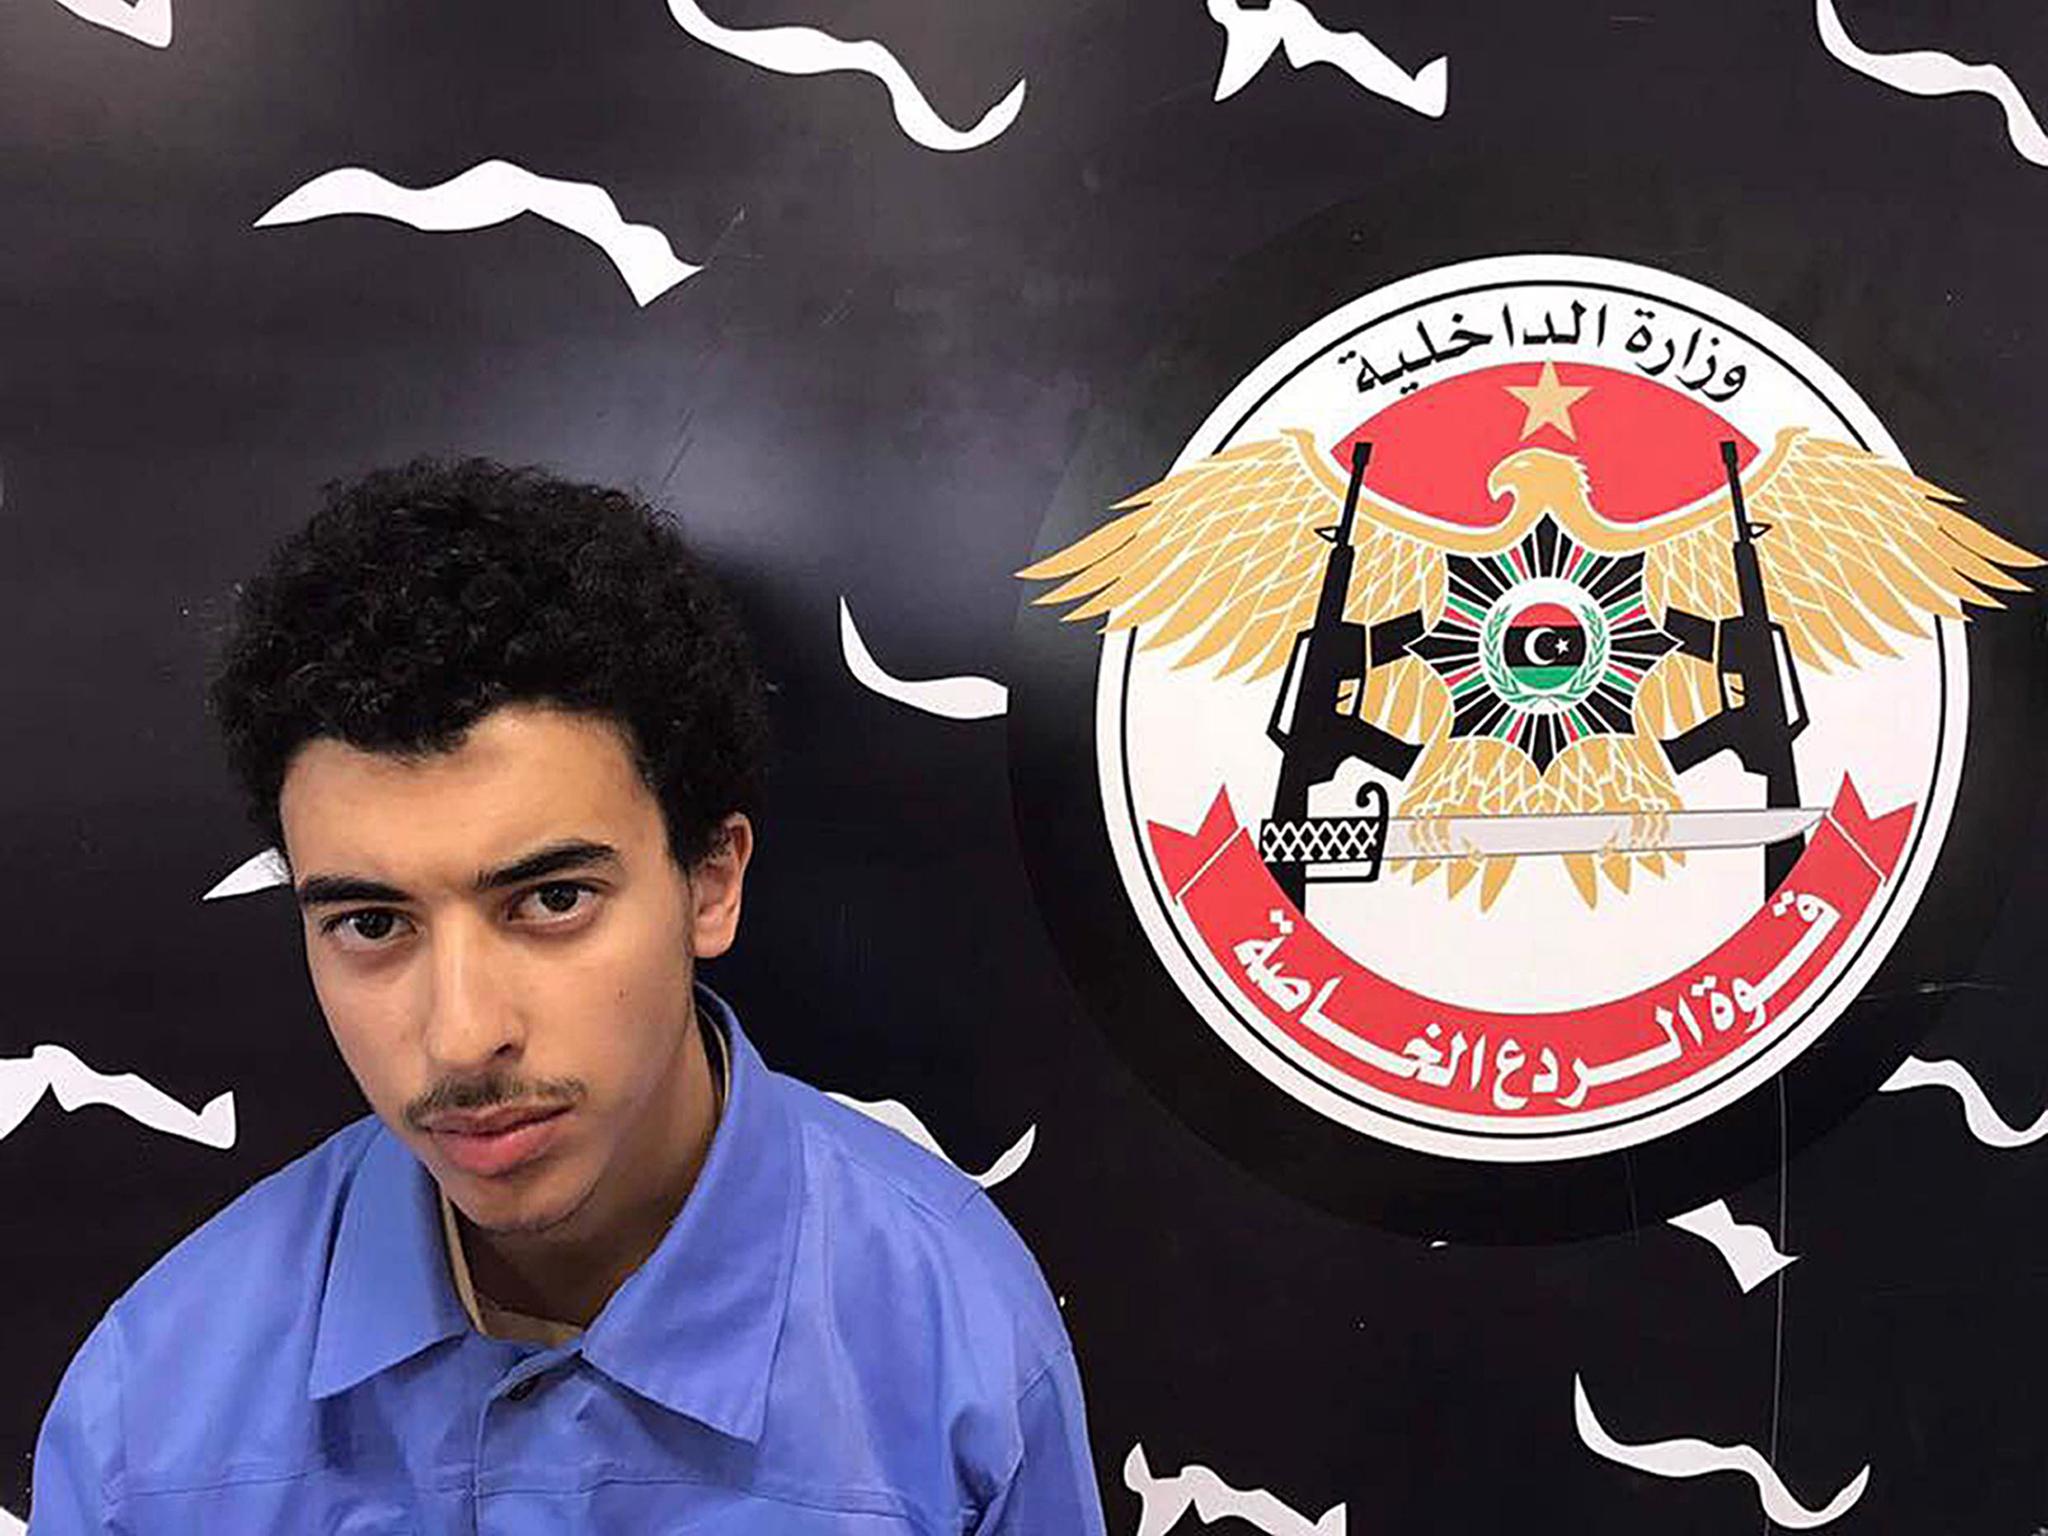 Hashim Abedi has been detained in Tripoli